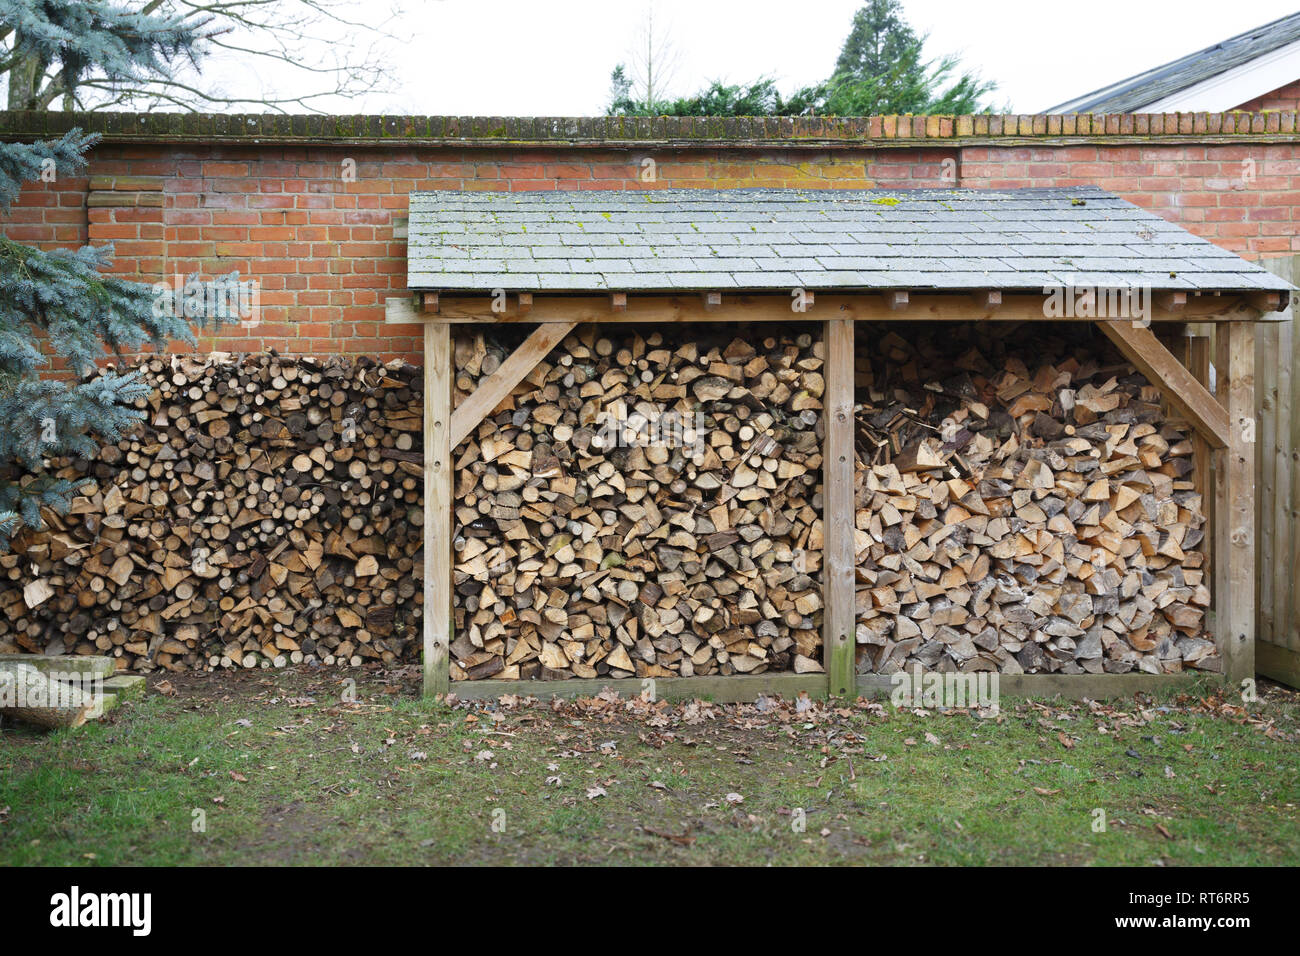 Log store filled with cut logs for firewood in a garden Stock Photo